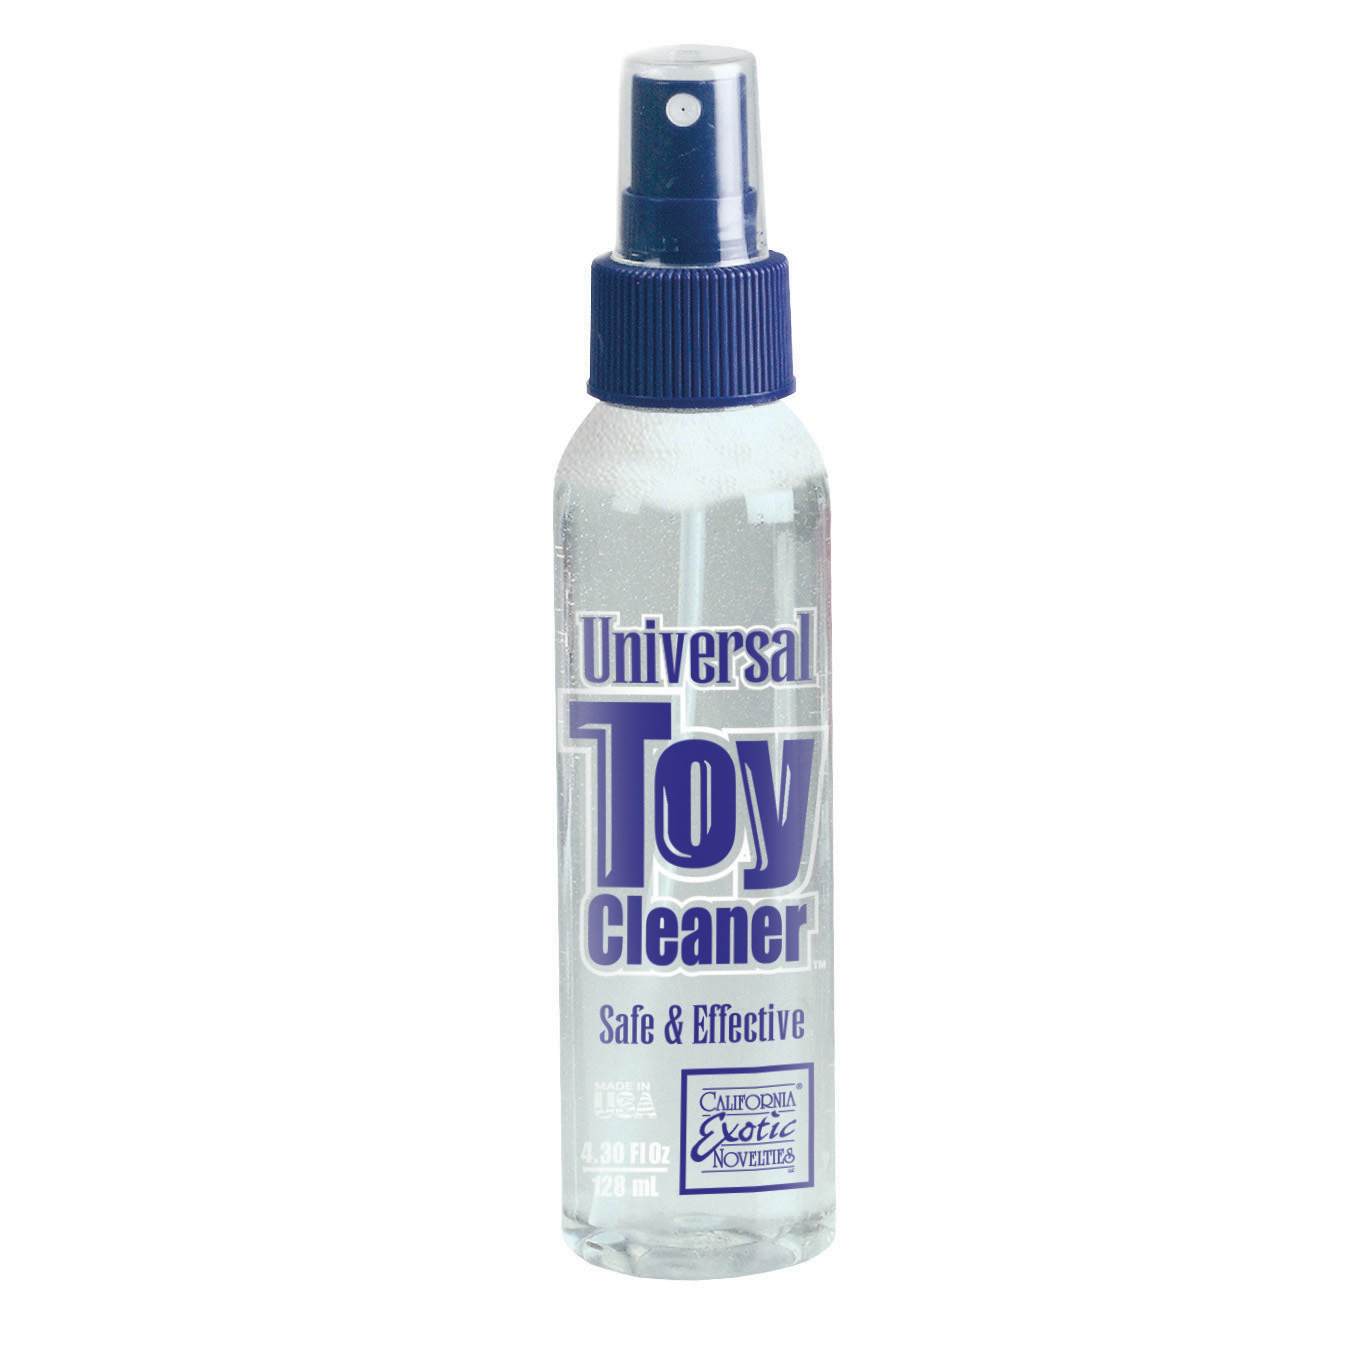 Universal Toy Cleaner - SE238500